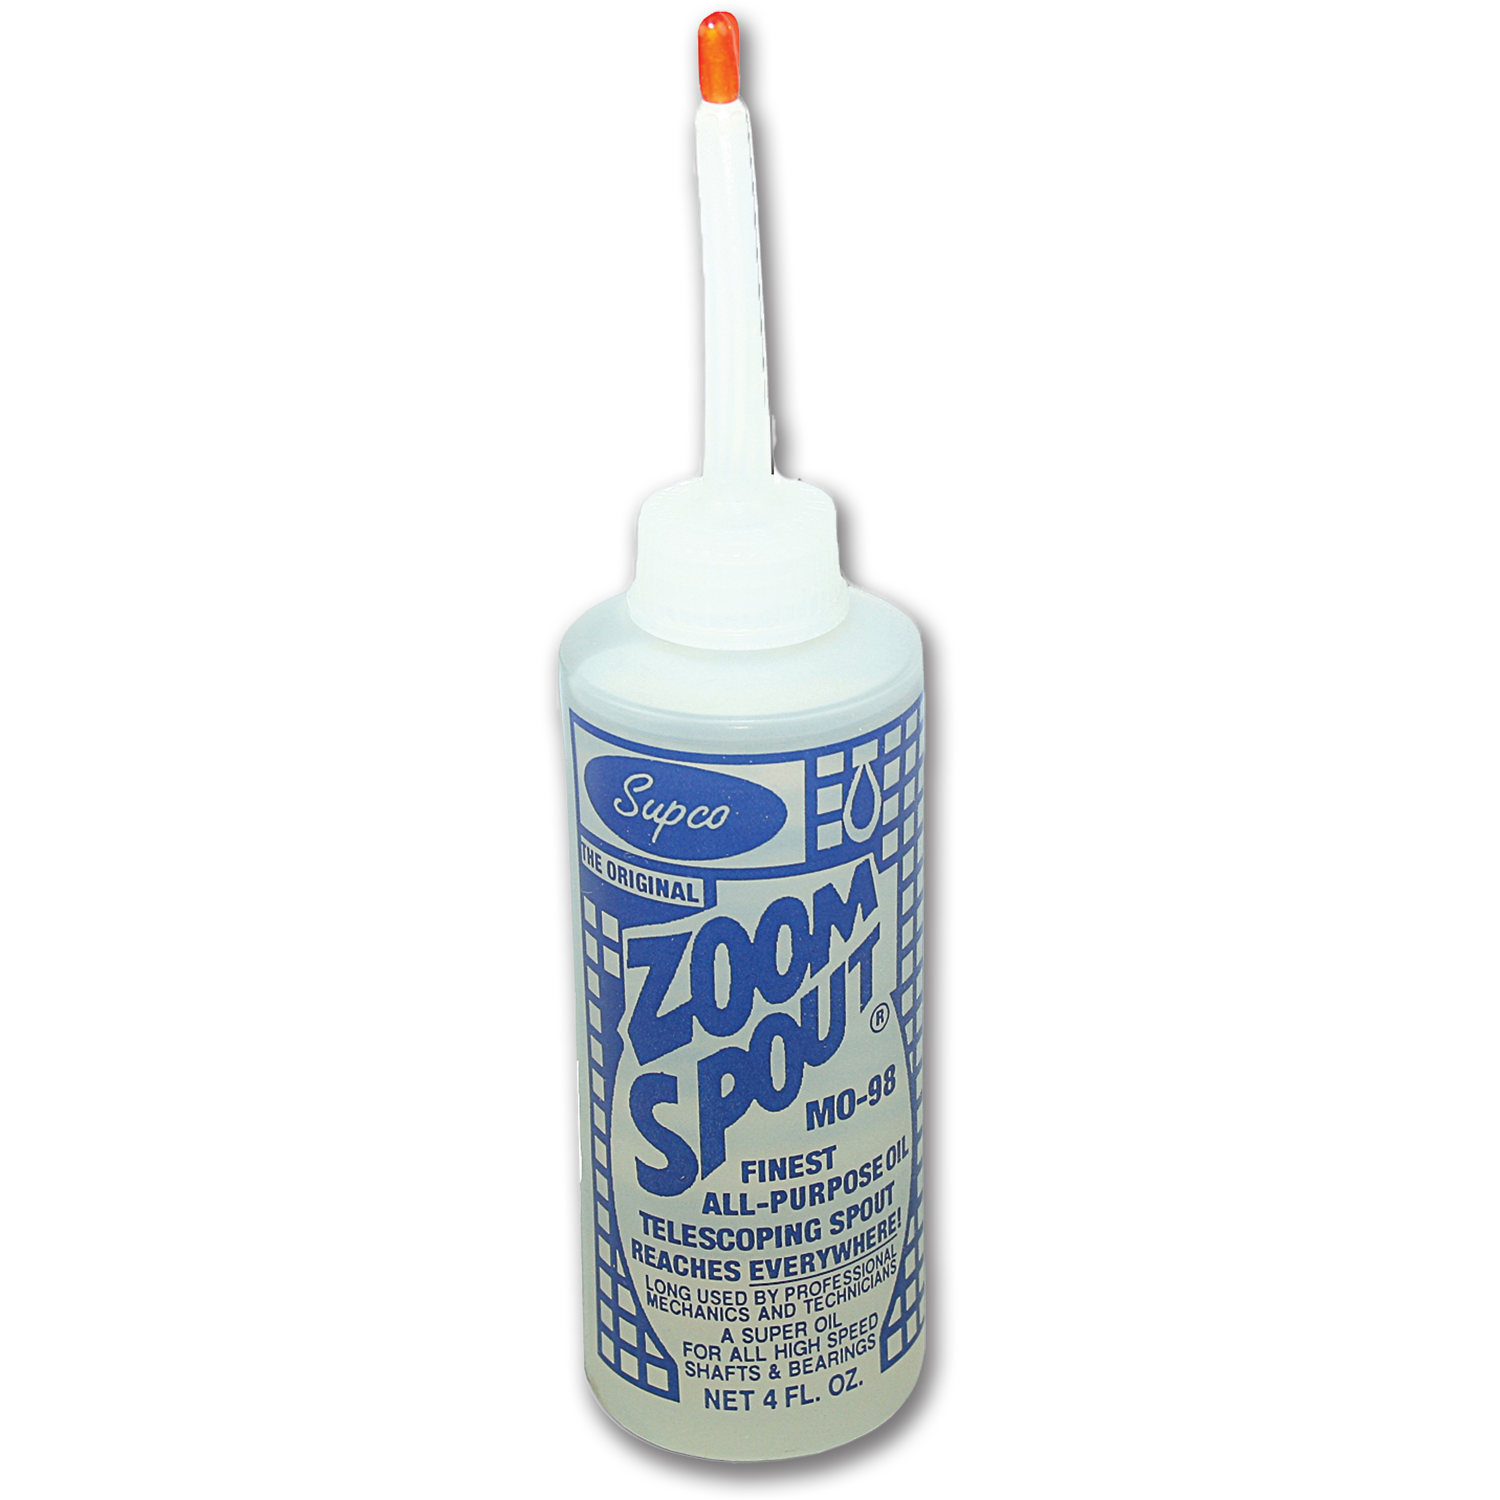 SUPCO 4-oz Zoom Spout at